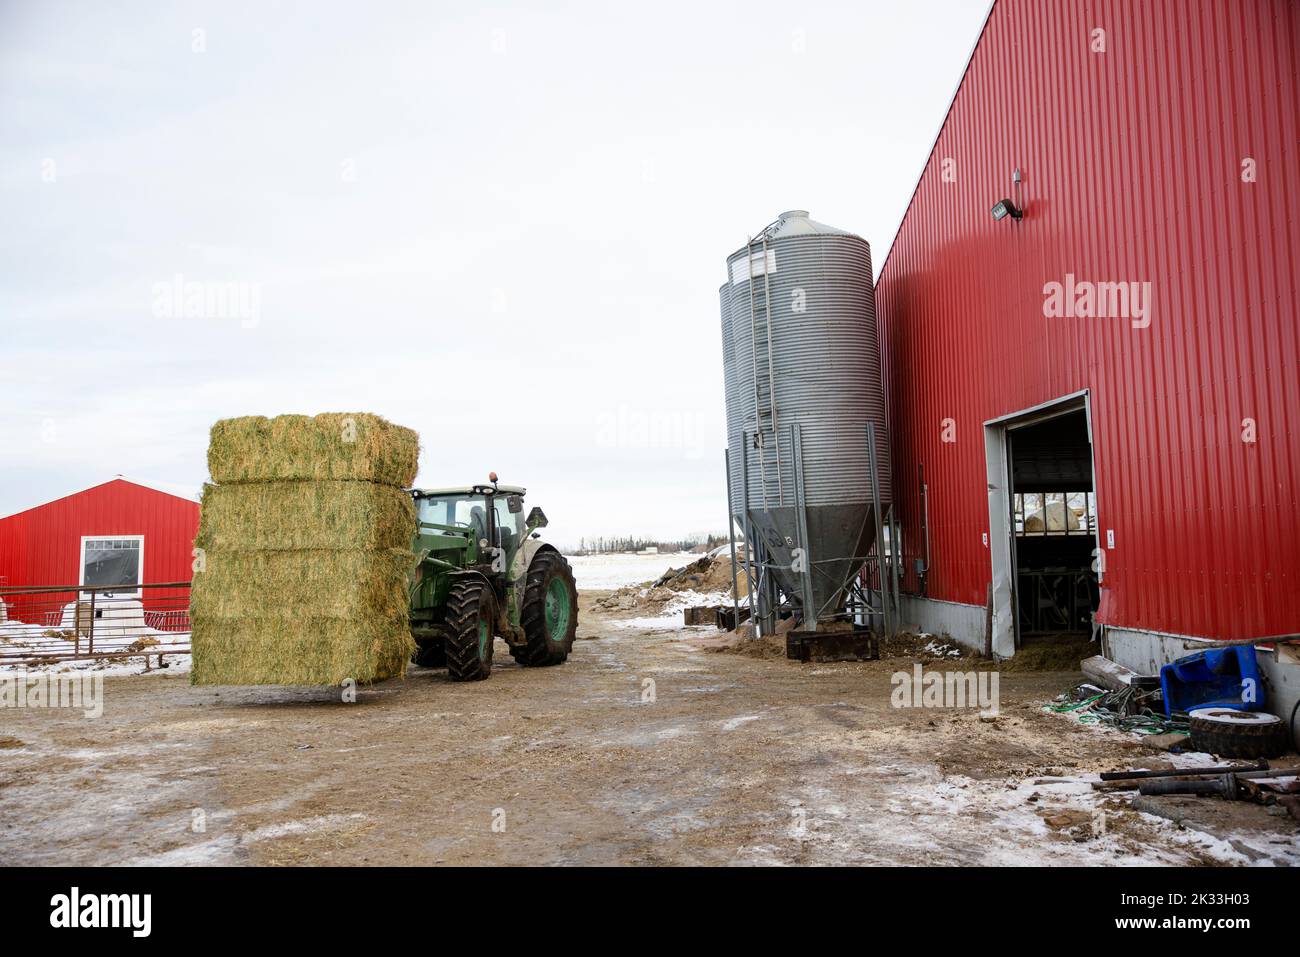 Tractor carrying haystack on farmyard Stock Photo